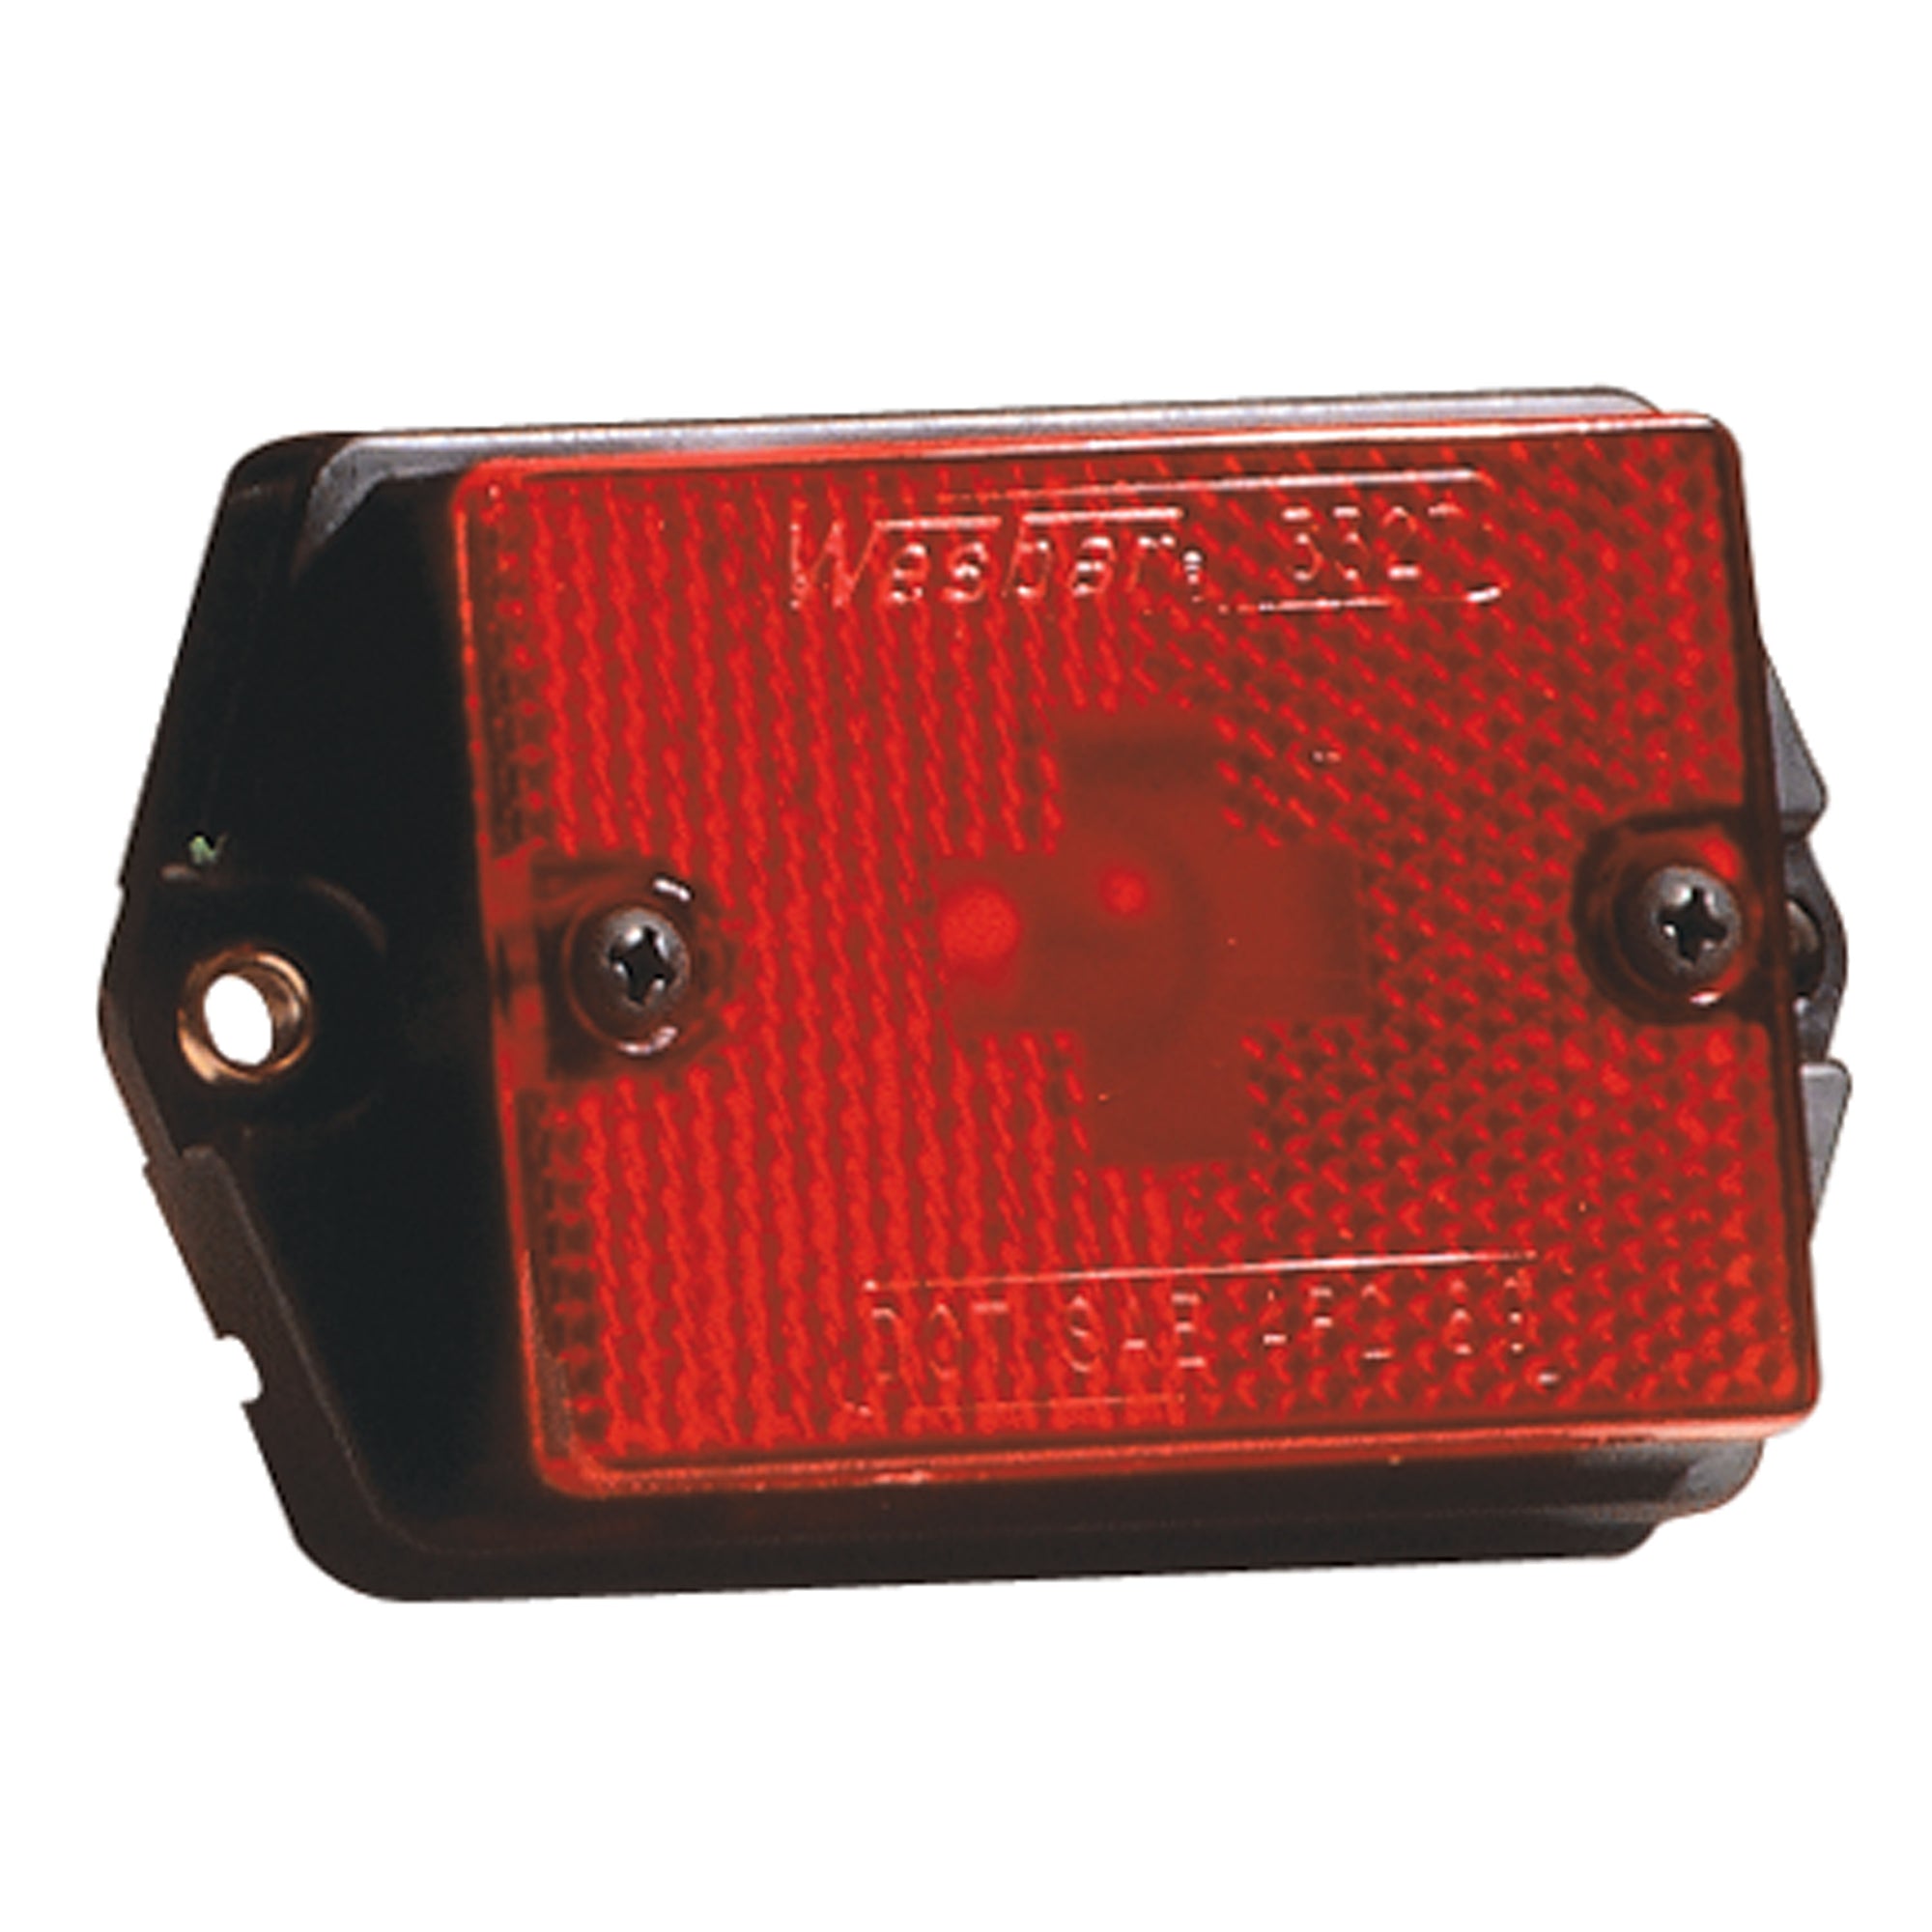 Wesbar 203133 Clearance/Side Marker Lights With Reflex Lens - Ear Mount, Red